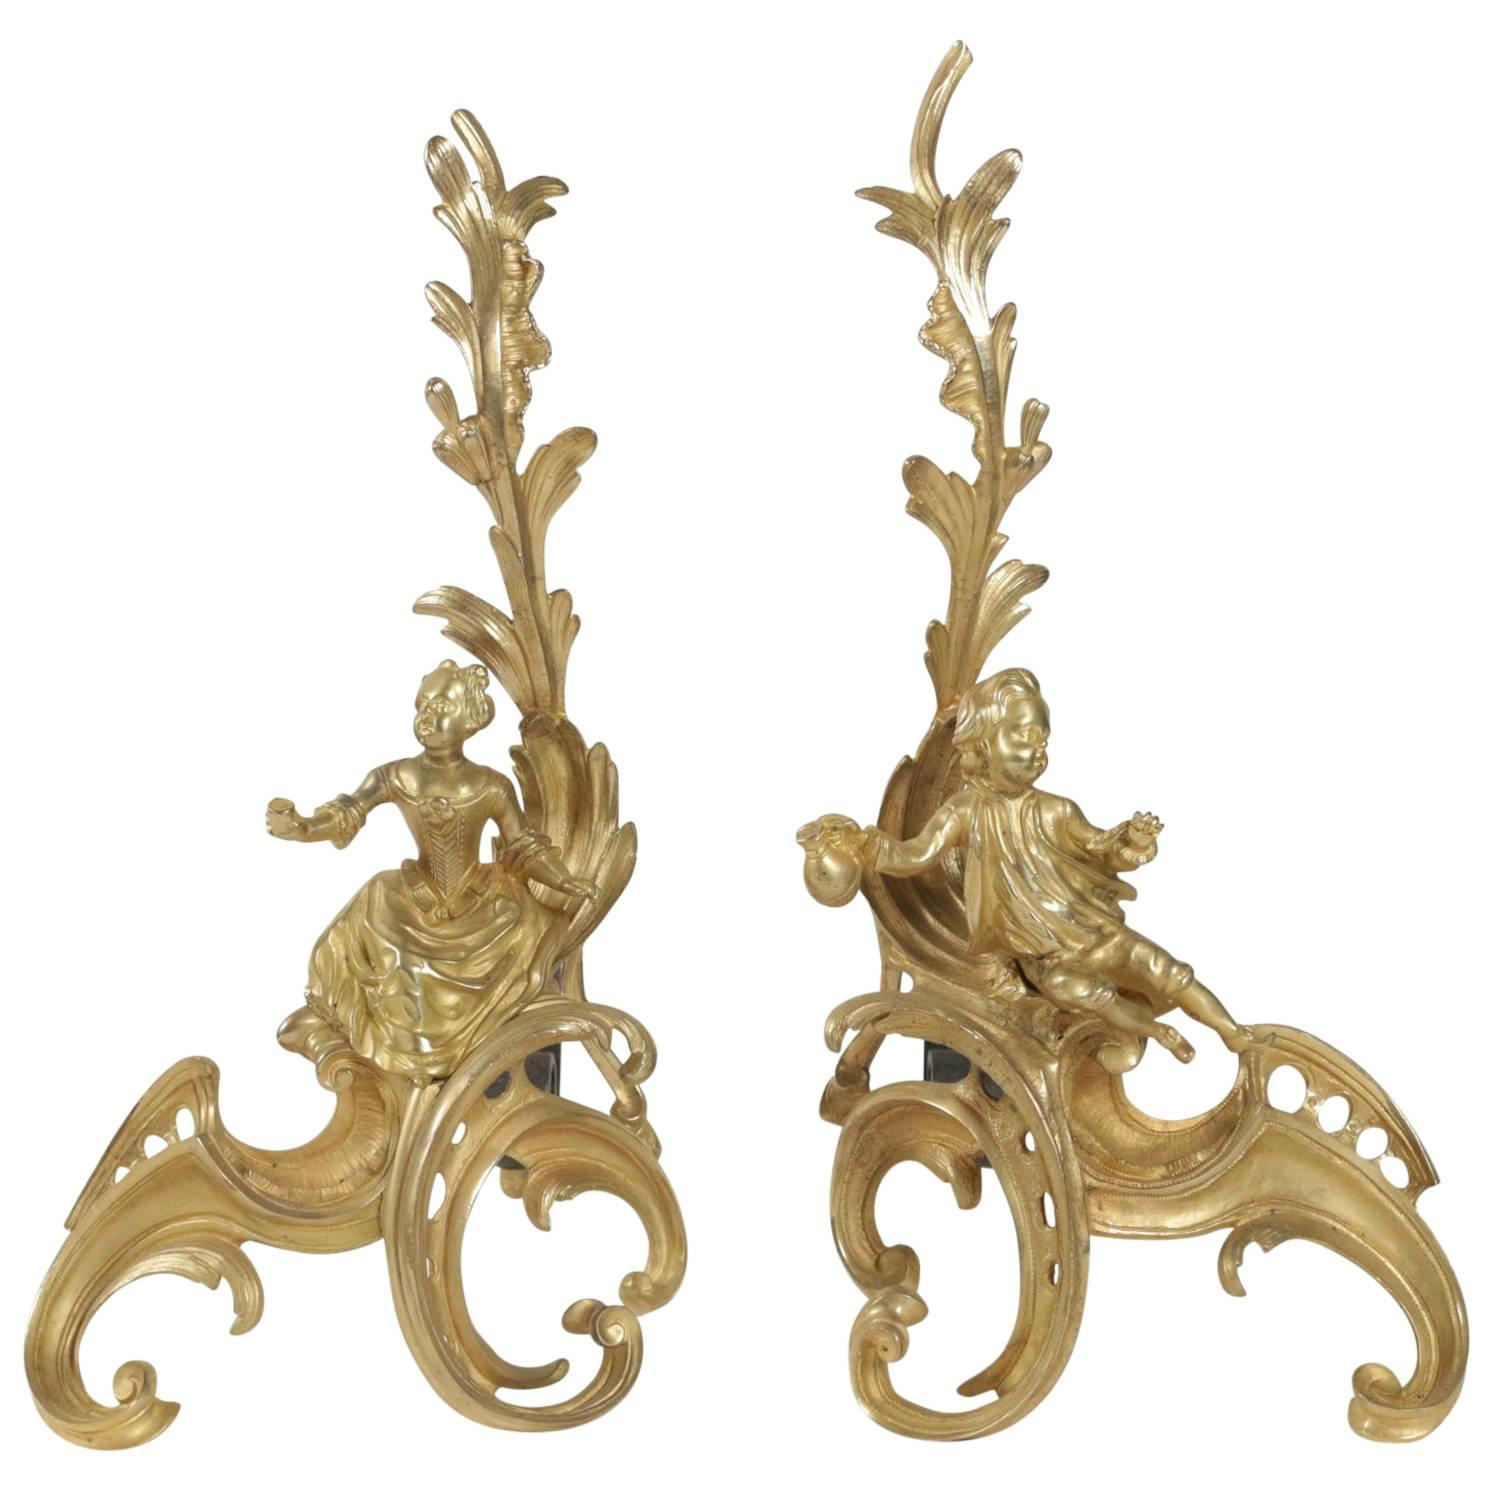 Pair of Louis XV Style Fireplace Irons in Gold Gilt Bronze from the 19th Century